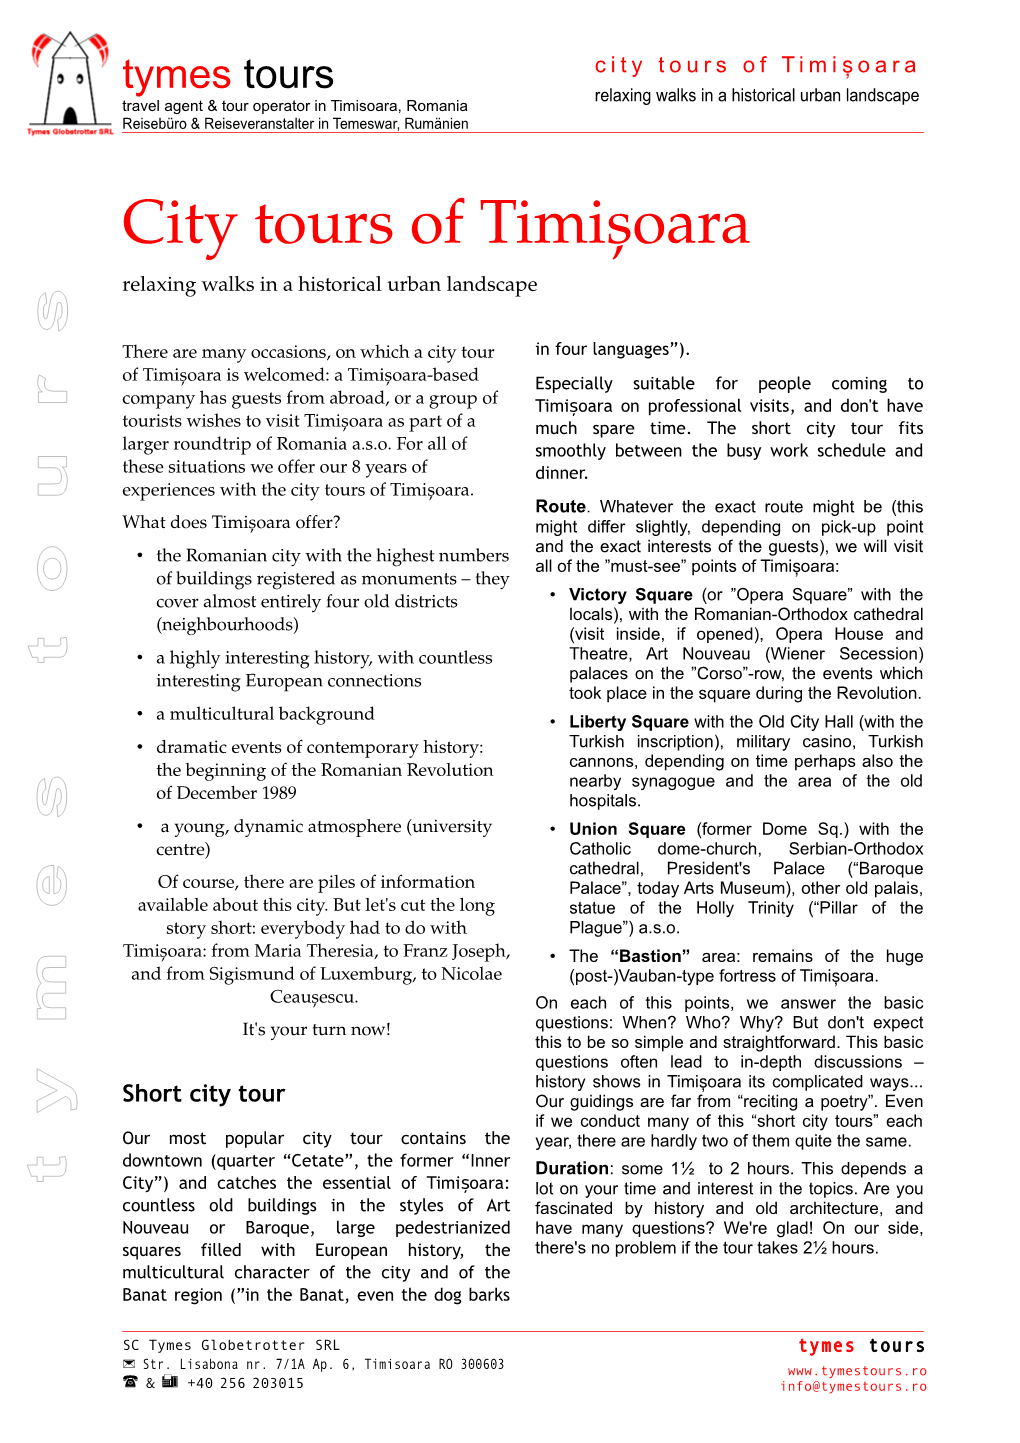 City Tours of Timișoara Relaxing Walks in a Historical Urban Landscape